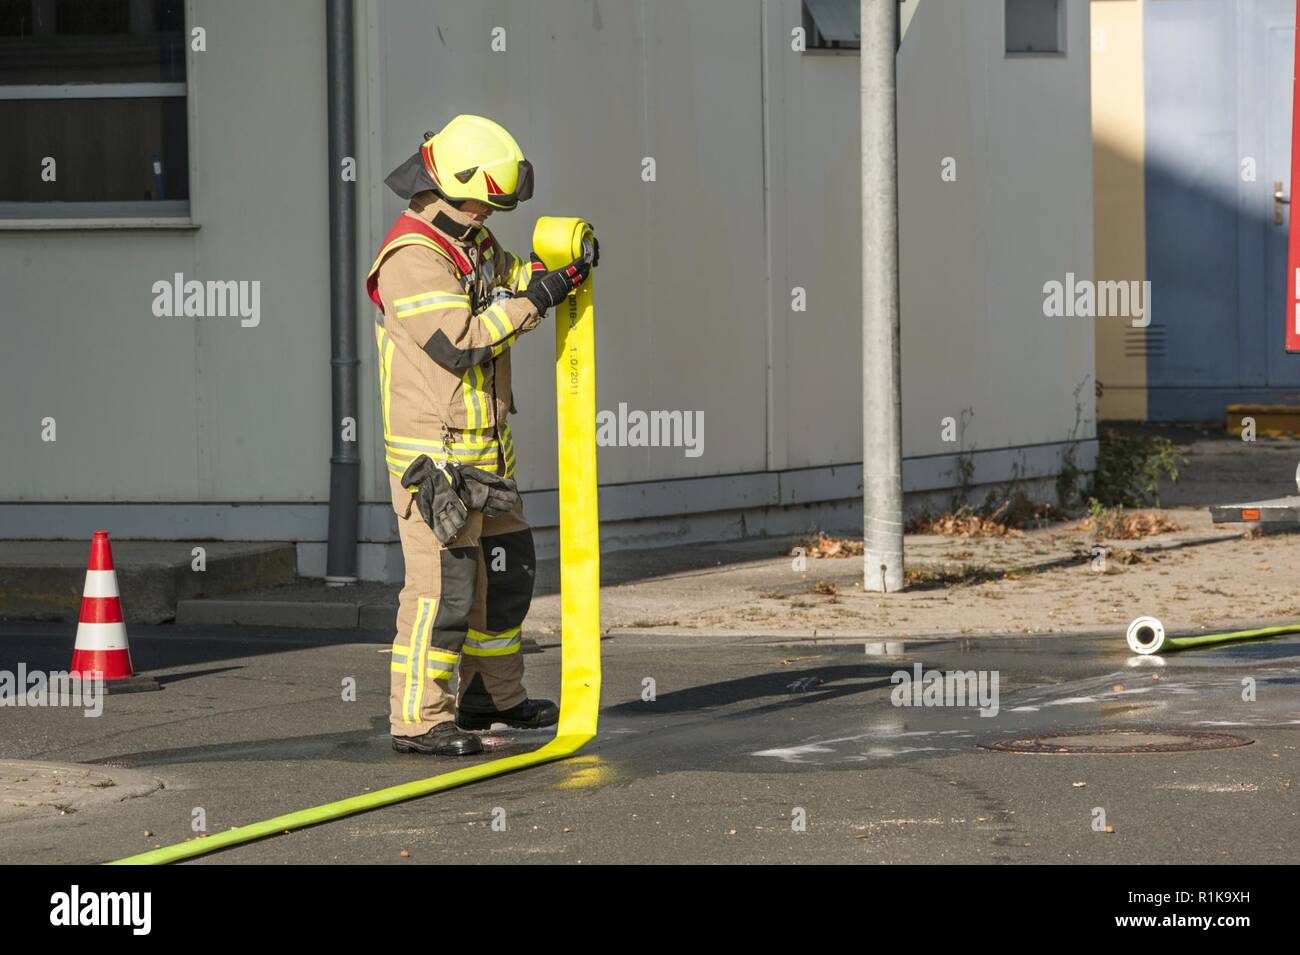 ANSBACH, Germany (Oct. 10, 2018) -- U.S. Army Garrison Ansbach firefighters conducted a fire drill exercise at the Barton Barracks, LRC in Ansbach,  during the fire prevention week 2018. The exercise was based on a simulated  scenario, rescuing a person from the 3rd floor and evacuating the remaining  personnel. Stock Photo